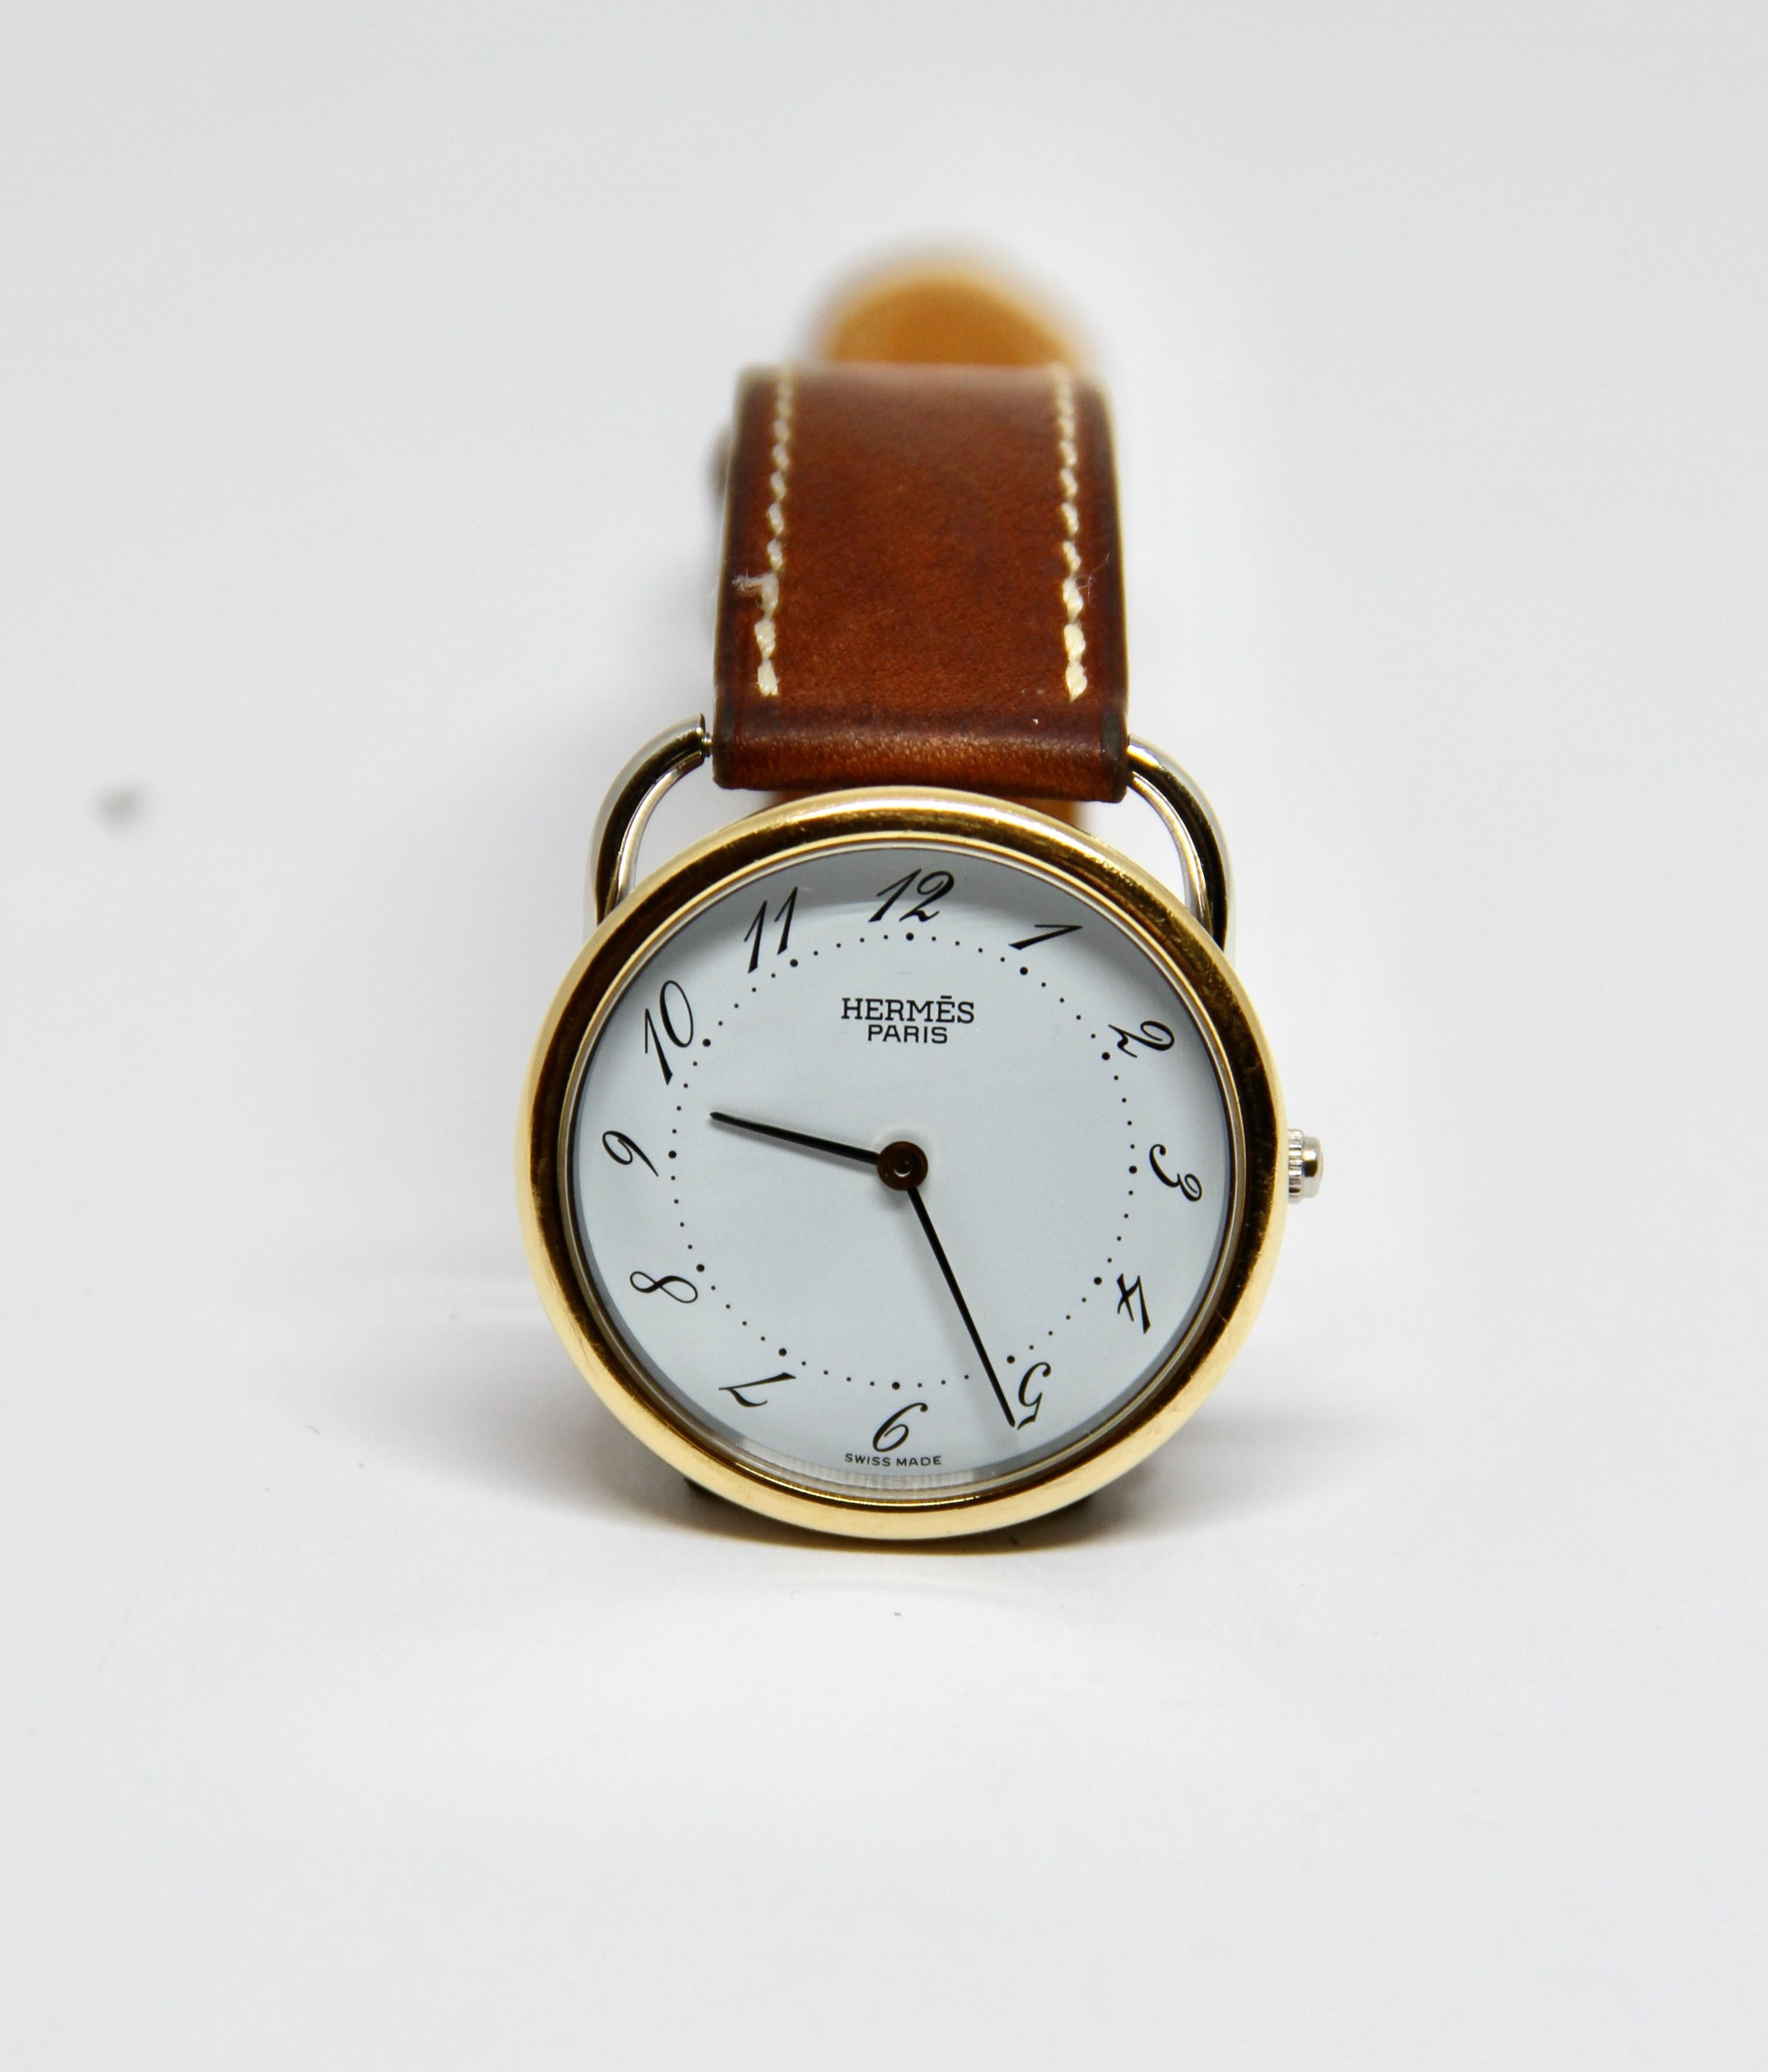 Classic from the house of Hermès, this timepiece is made of stainless steel with gold-plated case.
Beautiful craftsmanship on the leather band made of one of Hermès' iconic leather: 